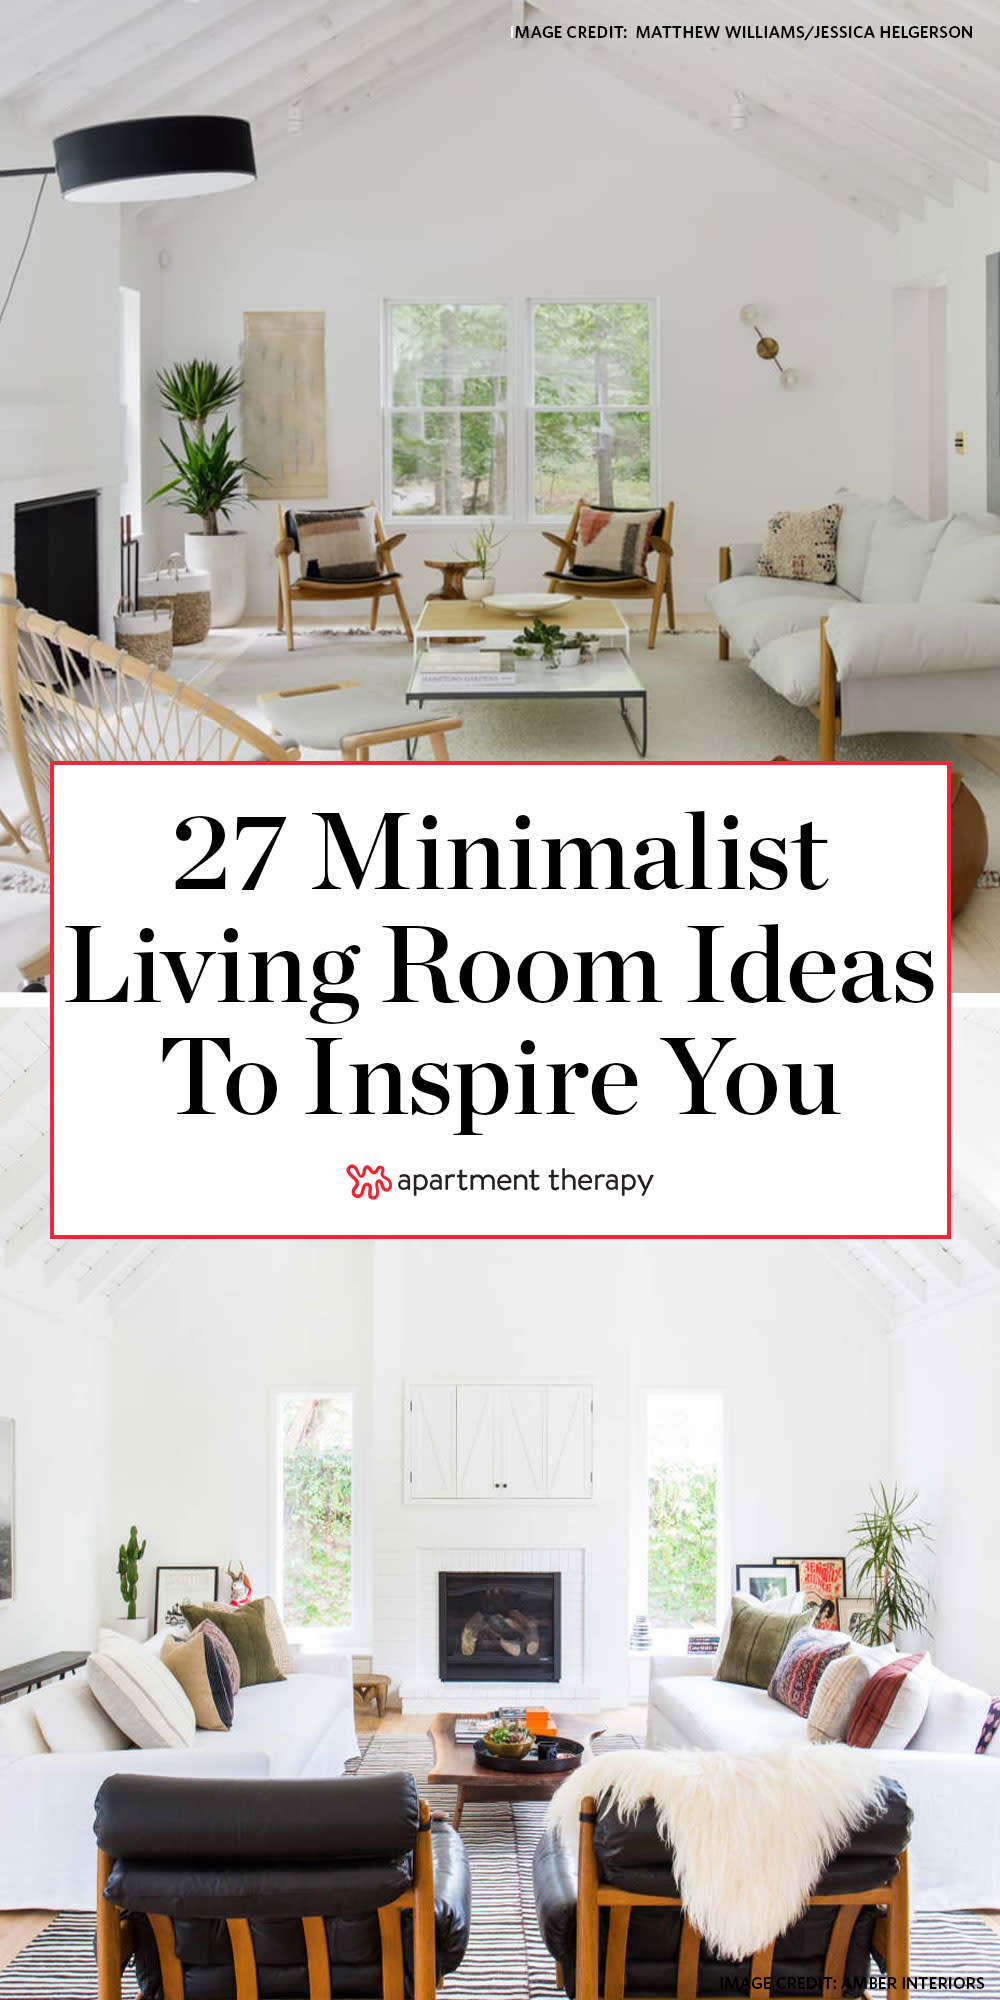 20 Minimalist Living Room Ideas   How to Use Minimalism in Living ...